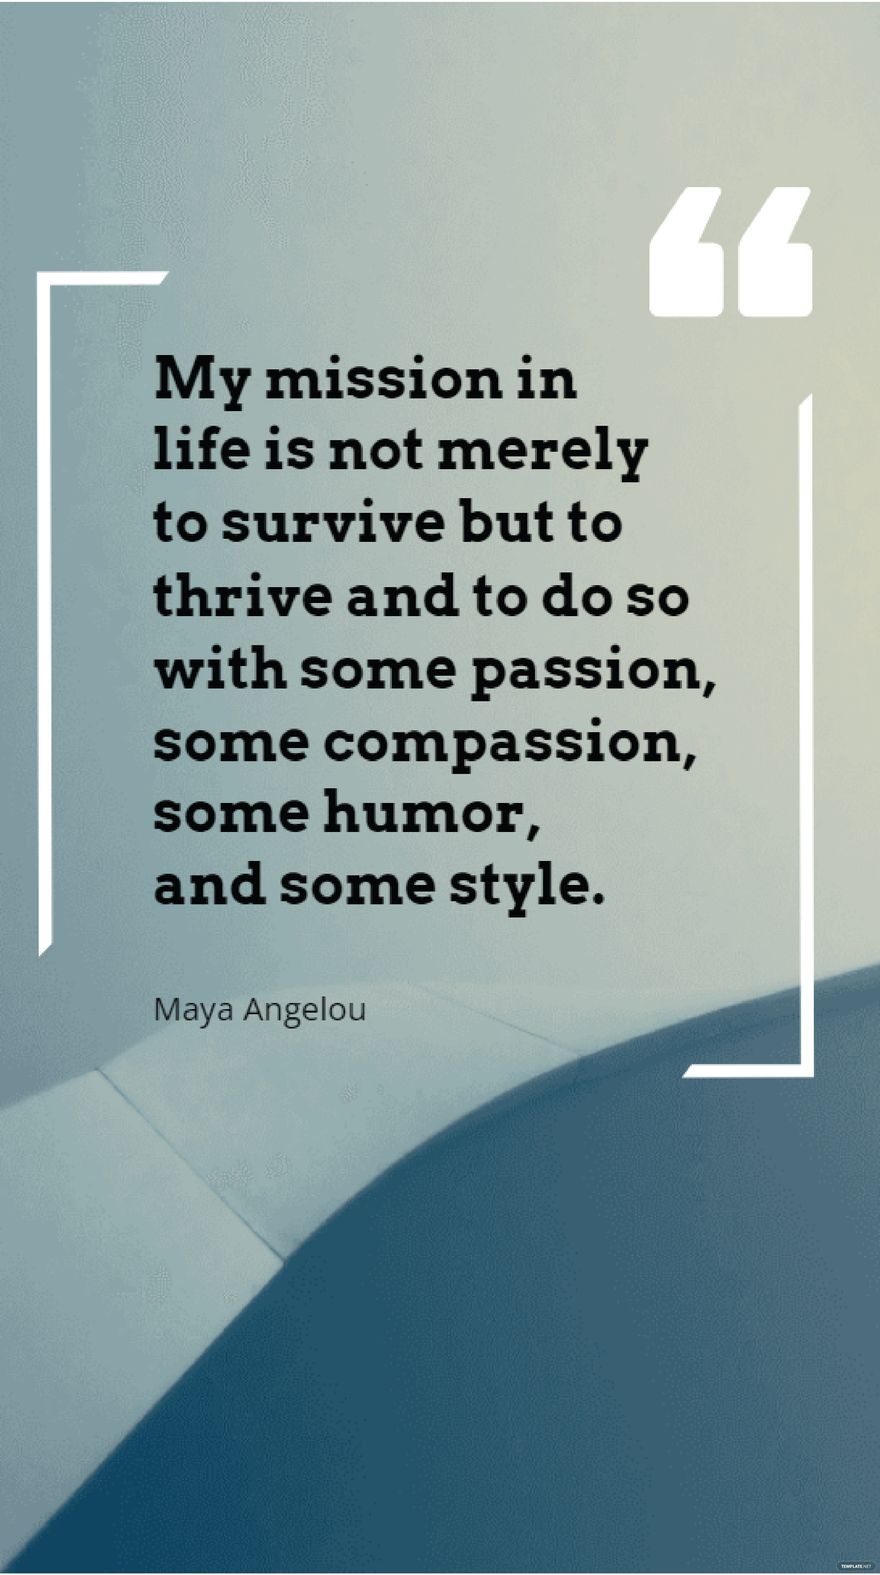 Maya Angelou - My mission in life is not merely to survive but to thrive and to do so with some passion, some compassion, some humor, and some style.